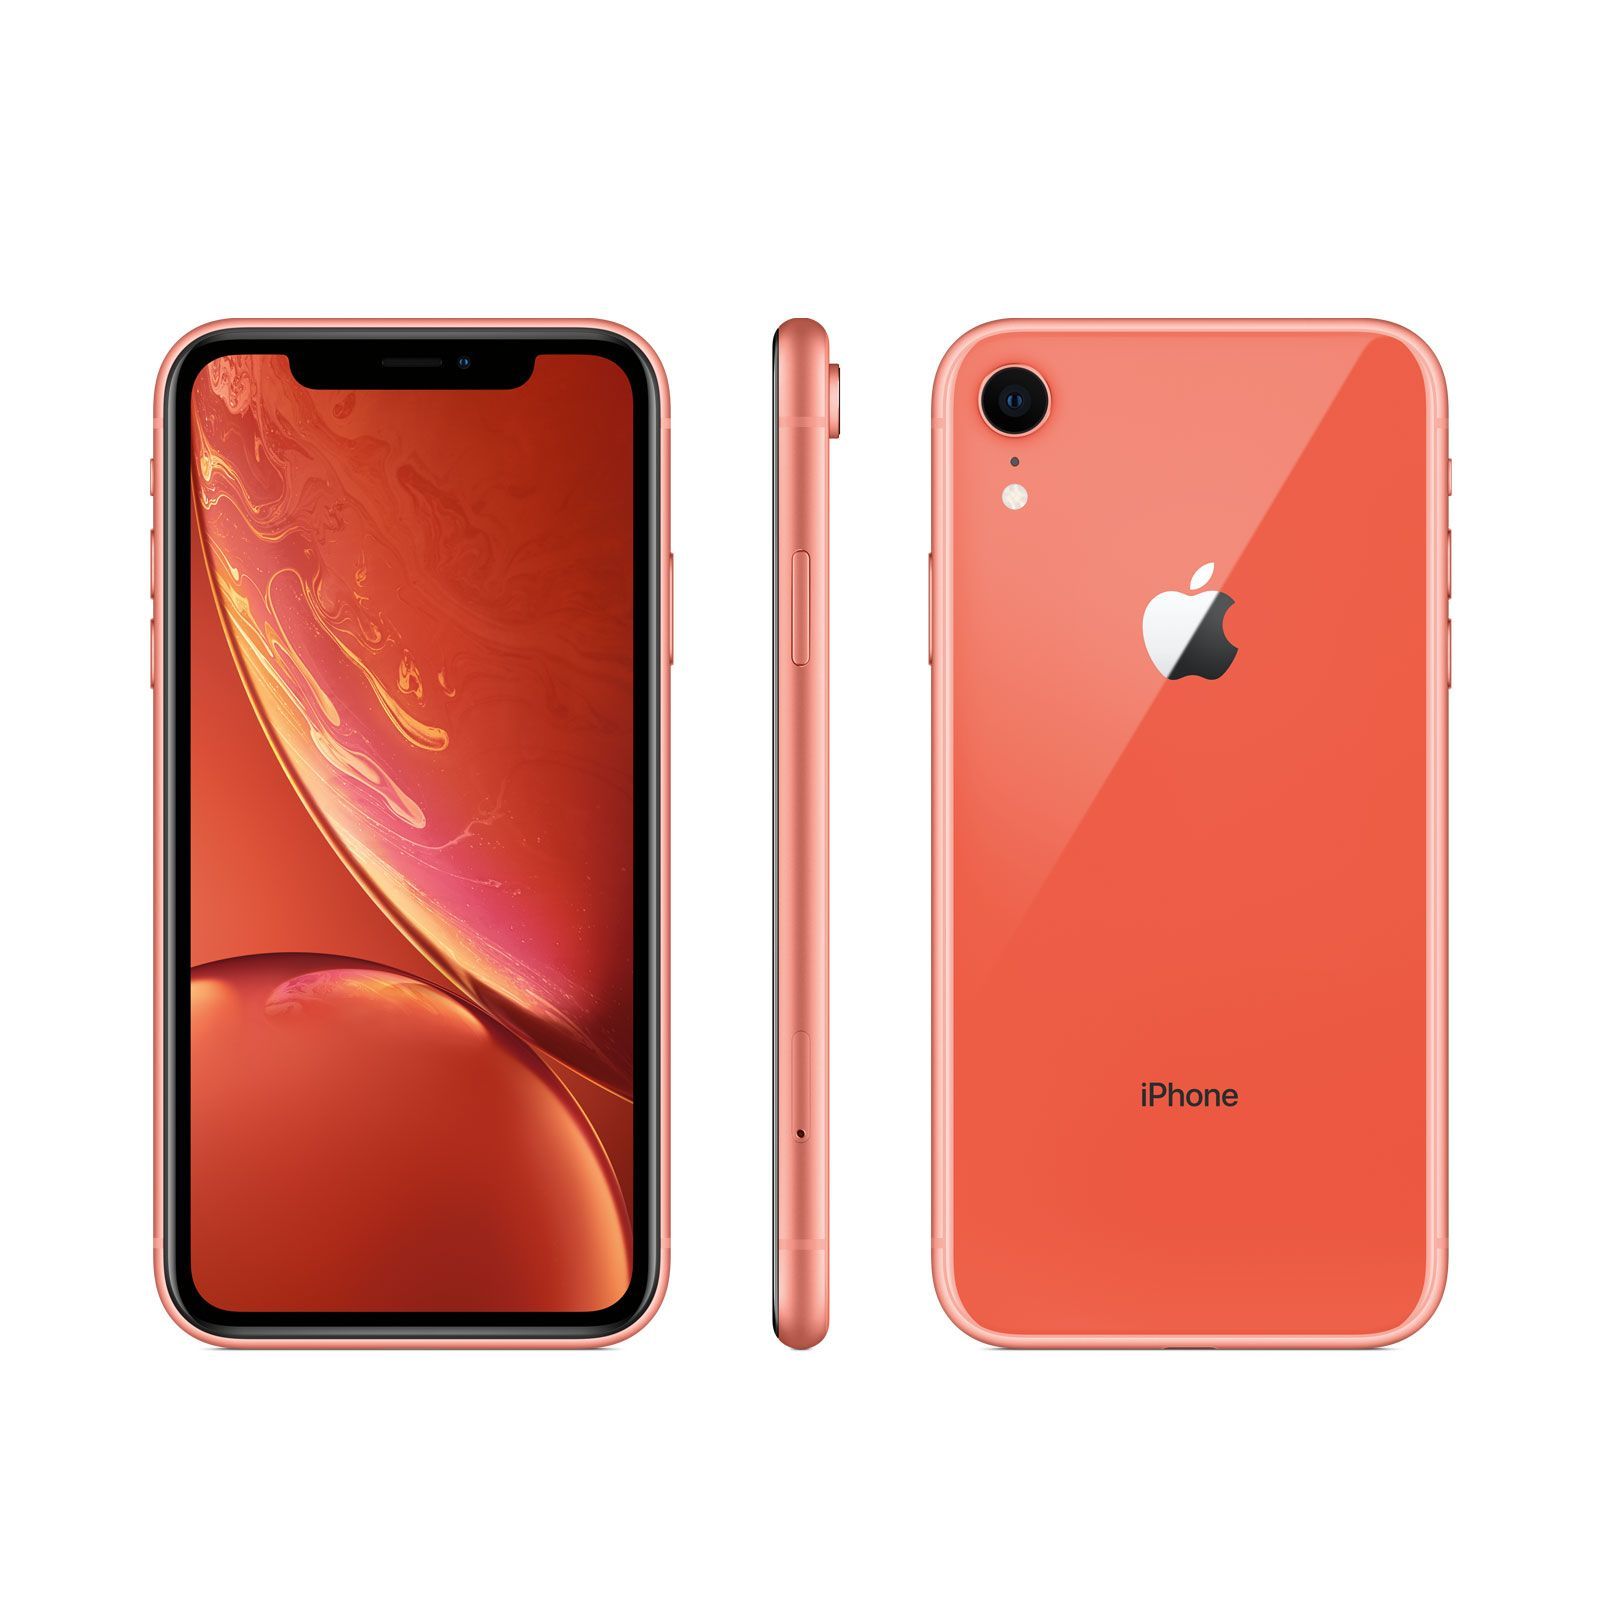 Deals on Apple iPhone XR 64GB in Coral Compare Prices